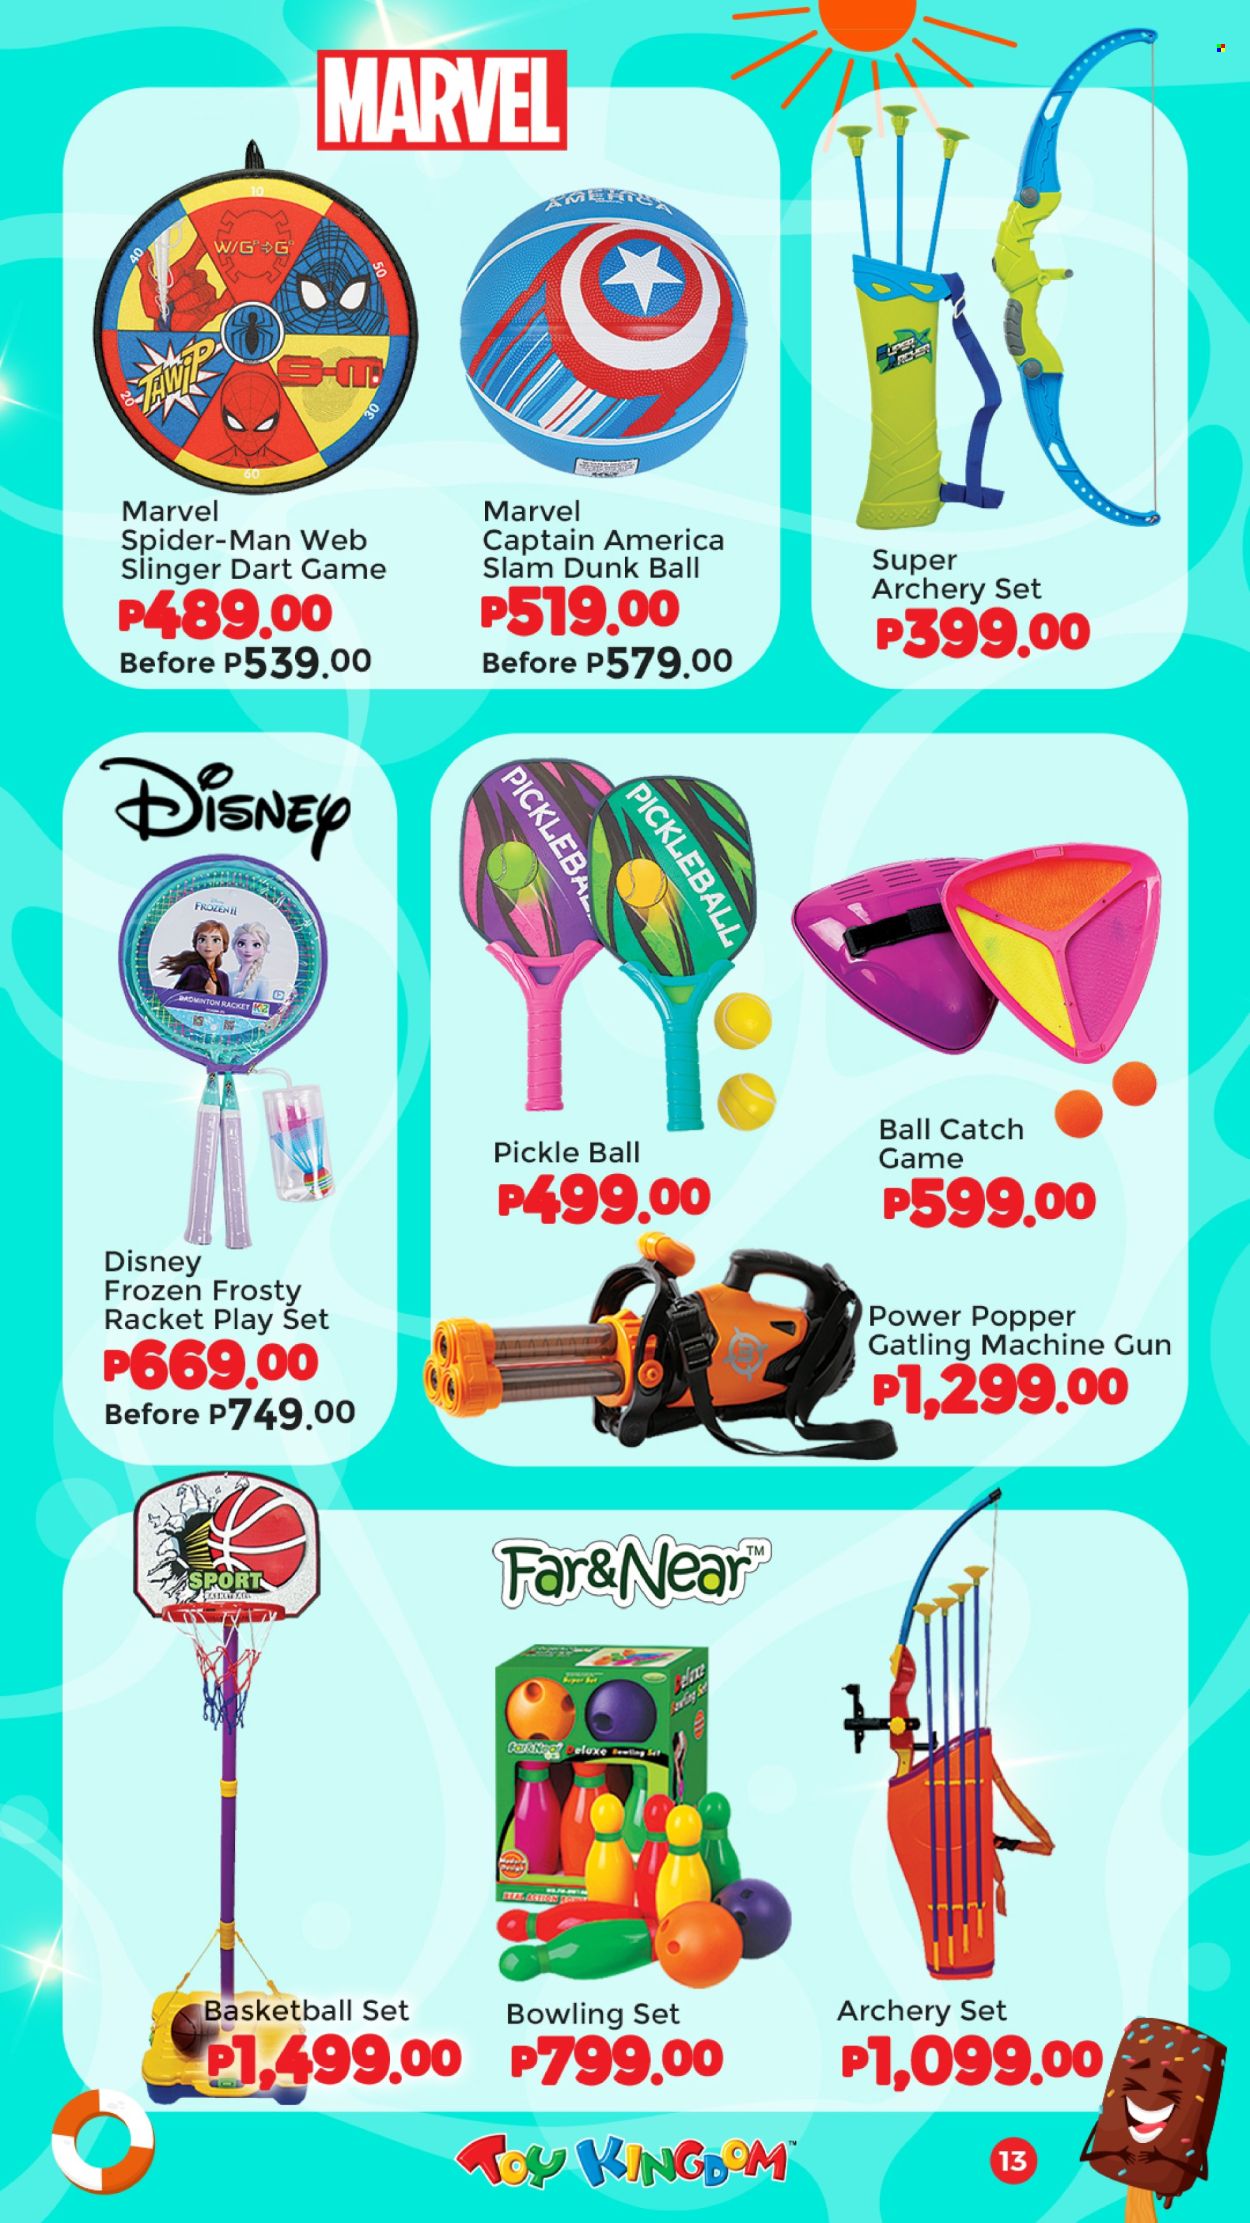 thumbnail - Toy Kingdom offer  - Sales products - Disney, Spiderman, Marvel, basketball, play set, toys, archery set. Page 13.